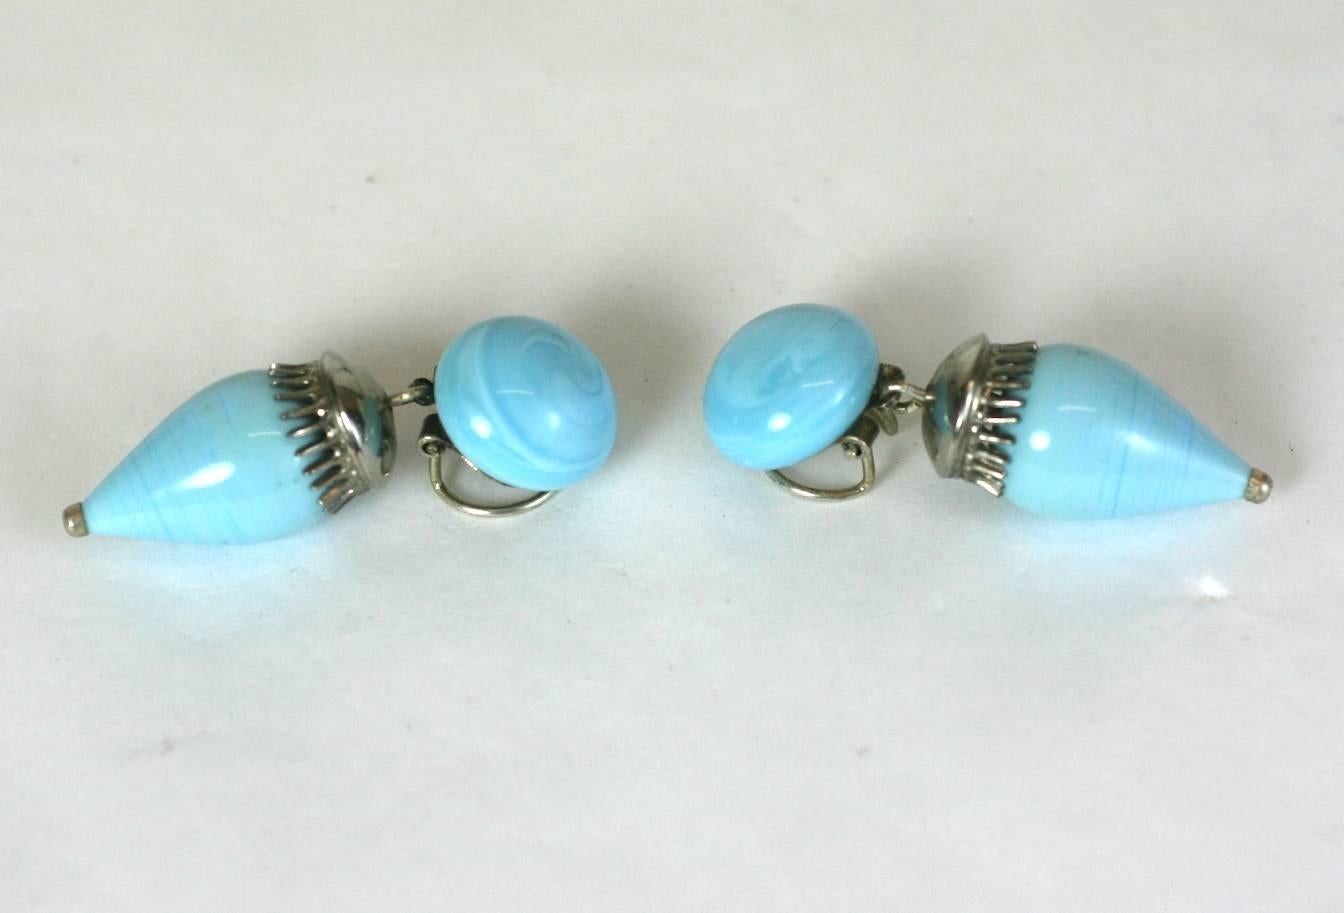 Louis Rousselet Faux Turquoise Drop Earrings In Excellent Condition For Sale In New York, NY